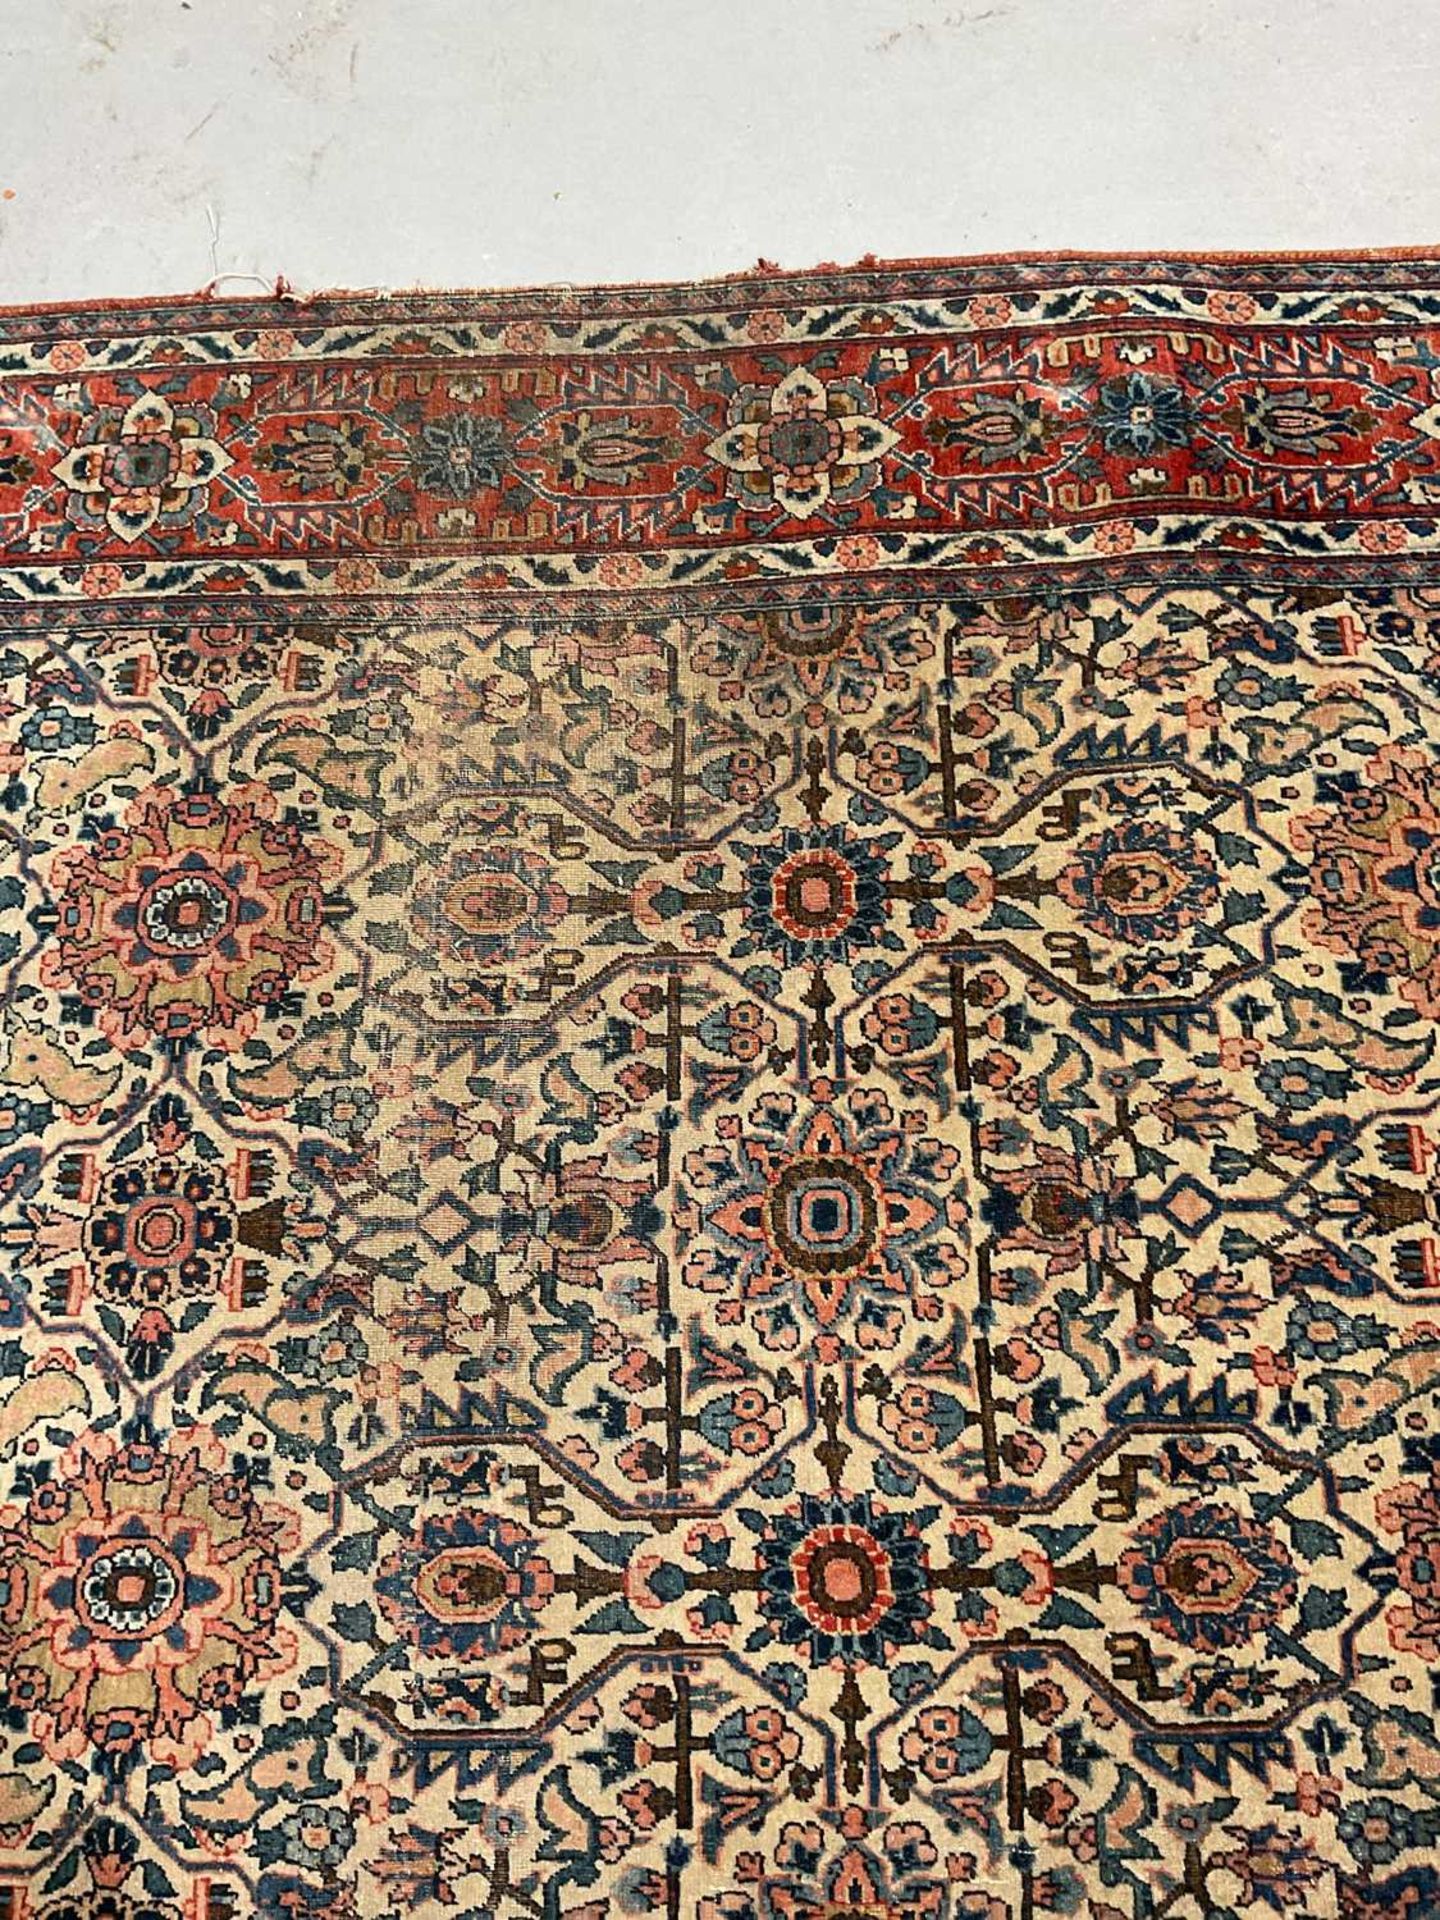 An antique ivory ground Kerman rug with an allover floral design within multiple borders 202 x 137cm - Image 10 of 10